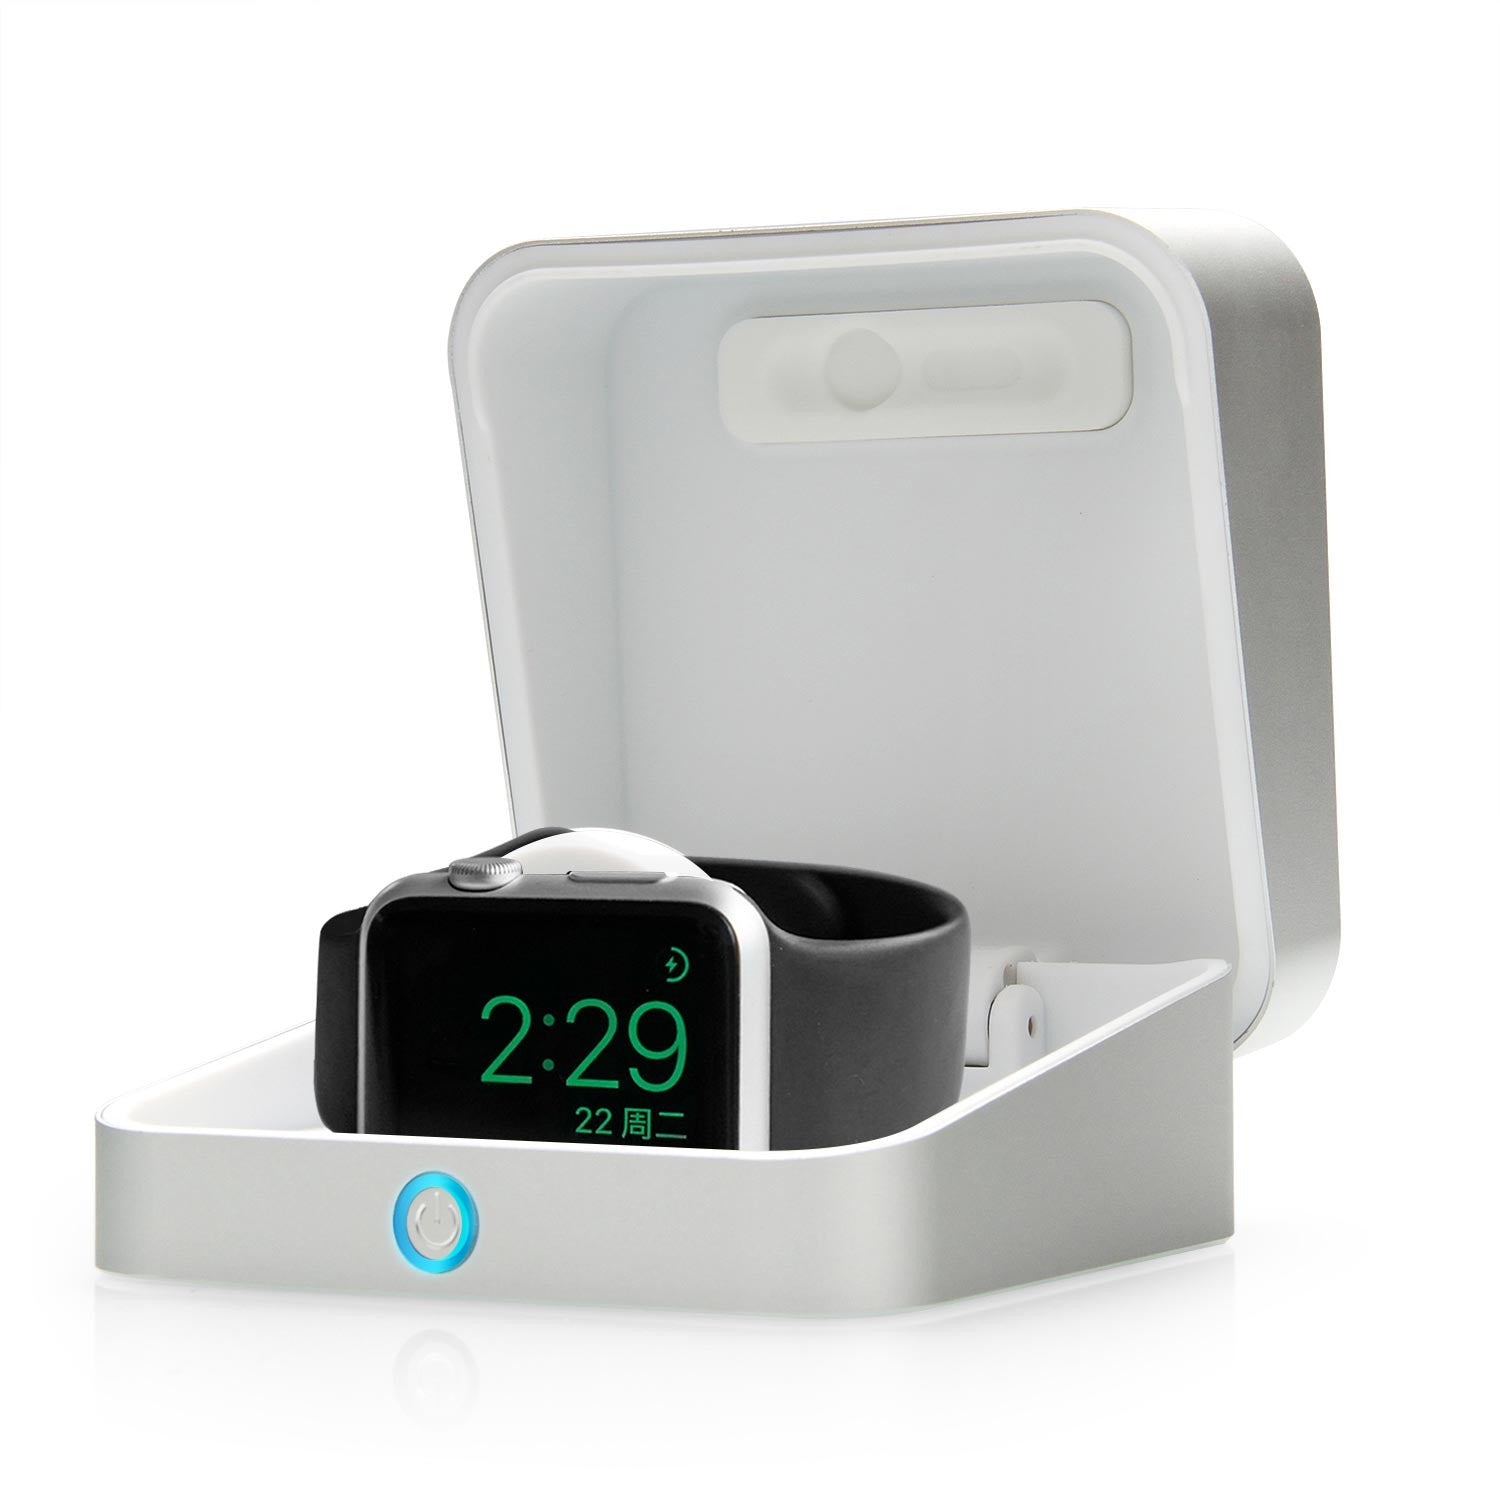 Cooper Apple Watch Power Box Charger Case & Power Bank (3000 mAh